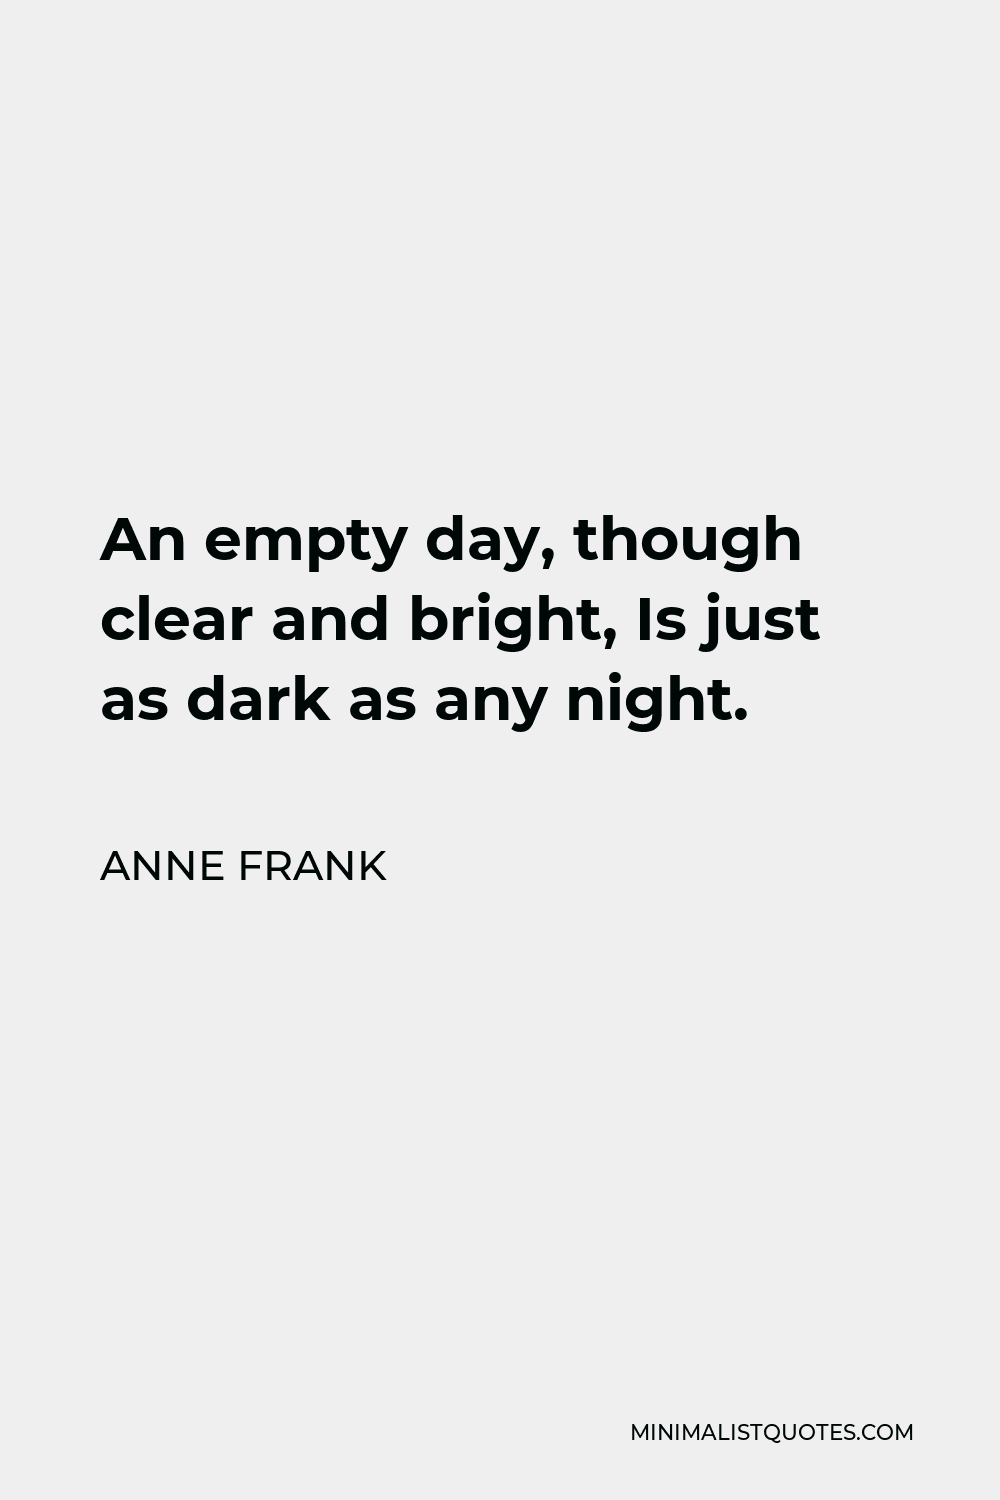 Anne Frank Quote: An empty day, though clear and bright, Is just as ...